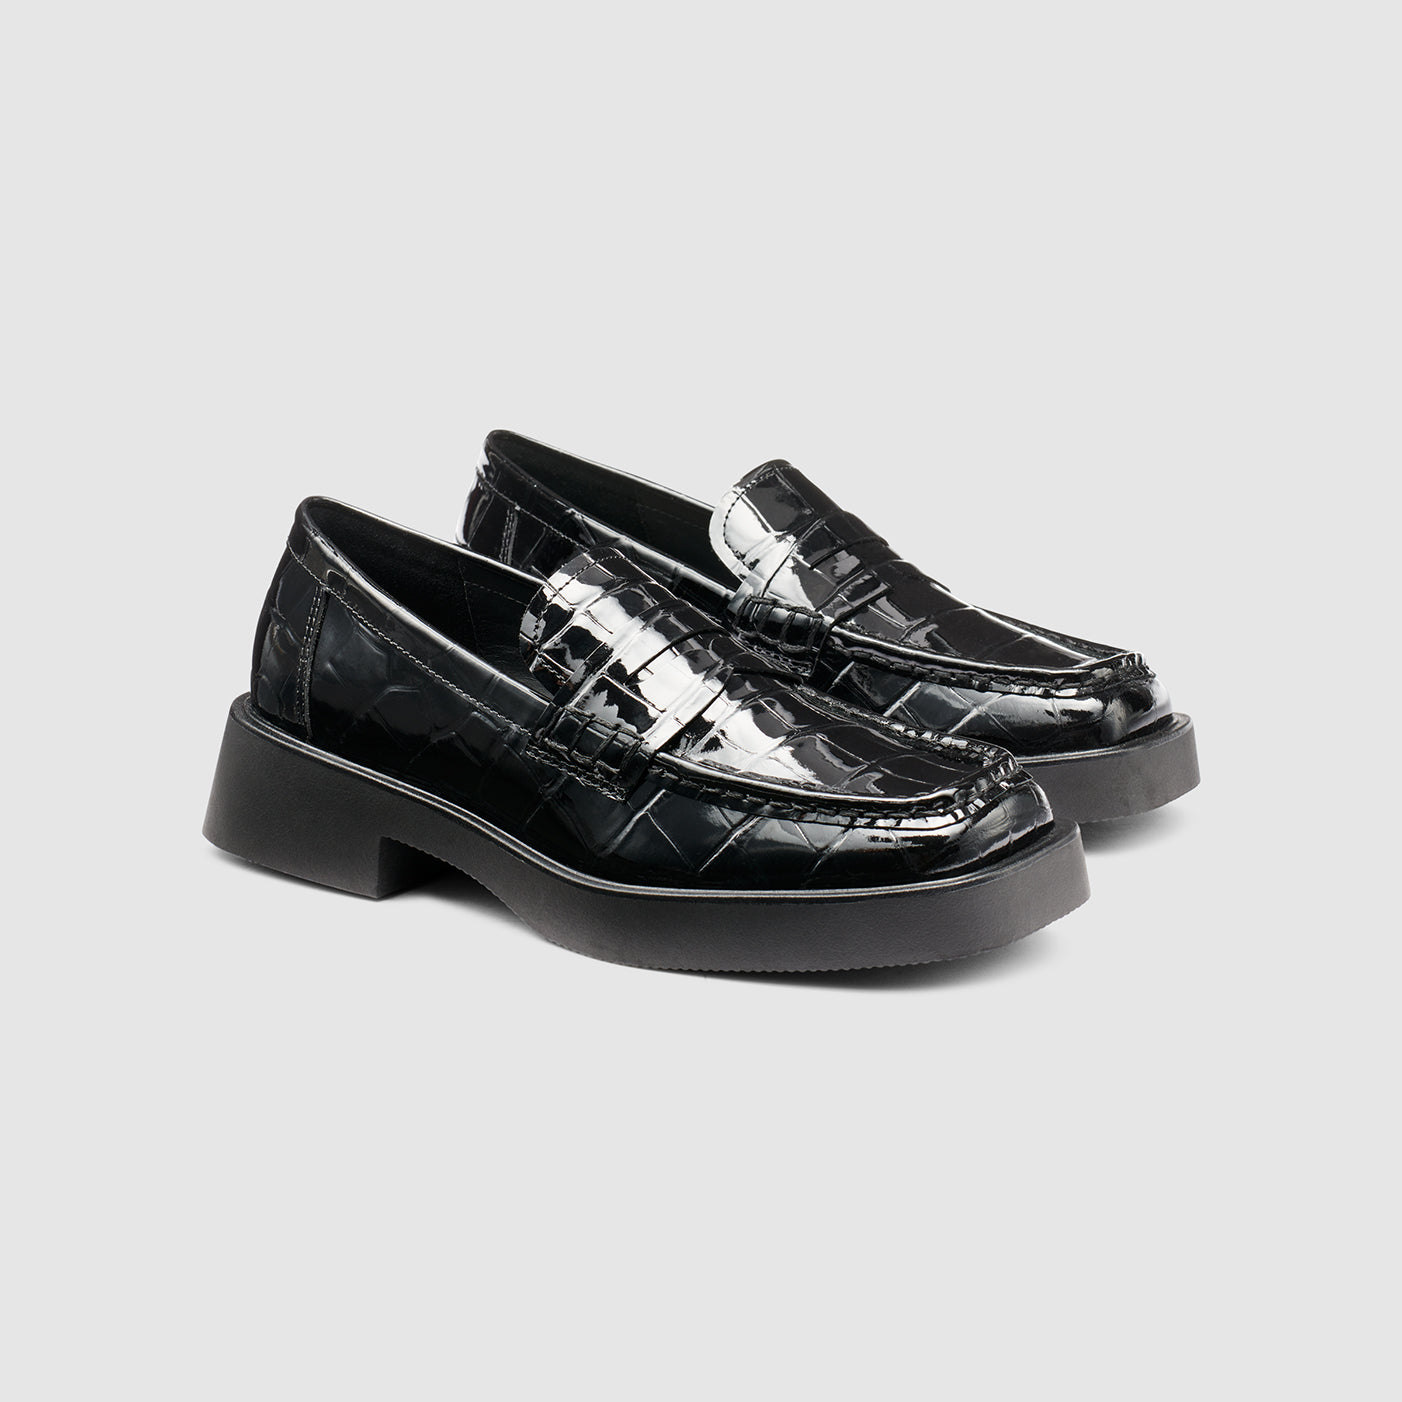 WOMENS BOWERY SQUARE TOE LOAFER